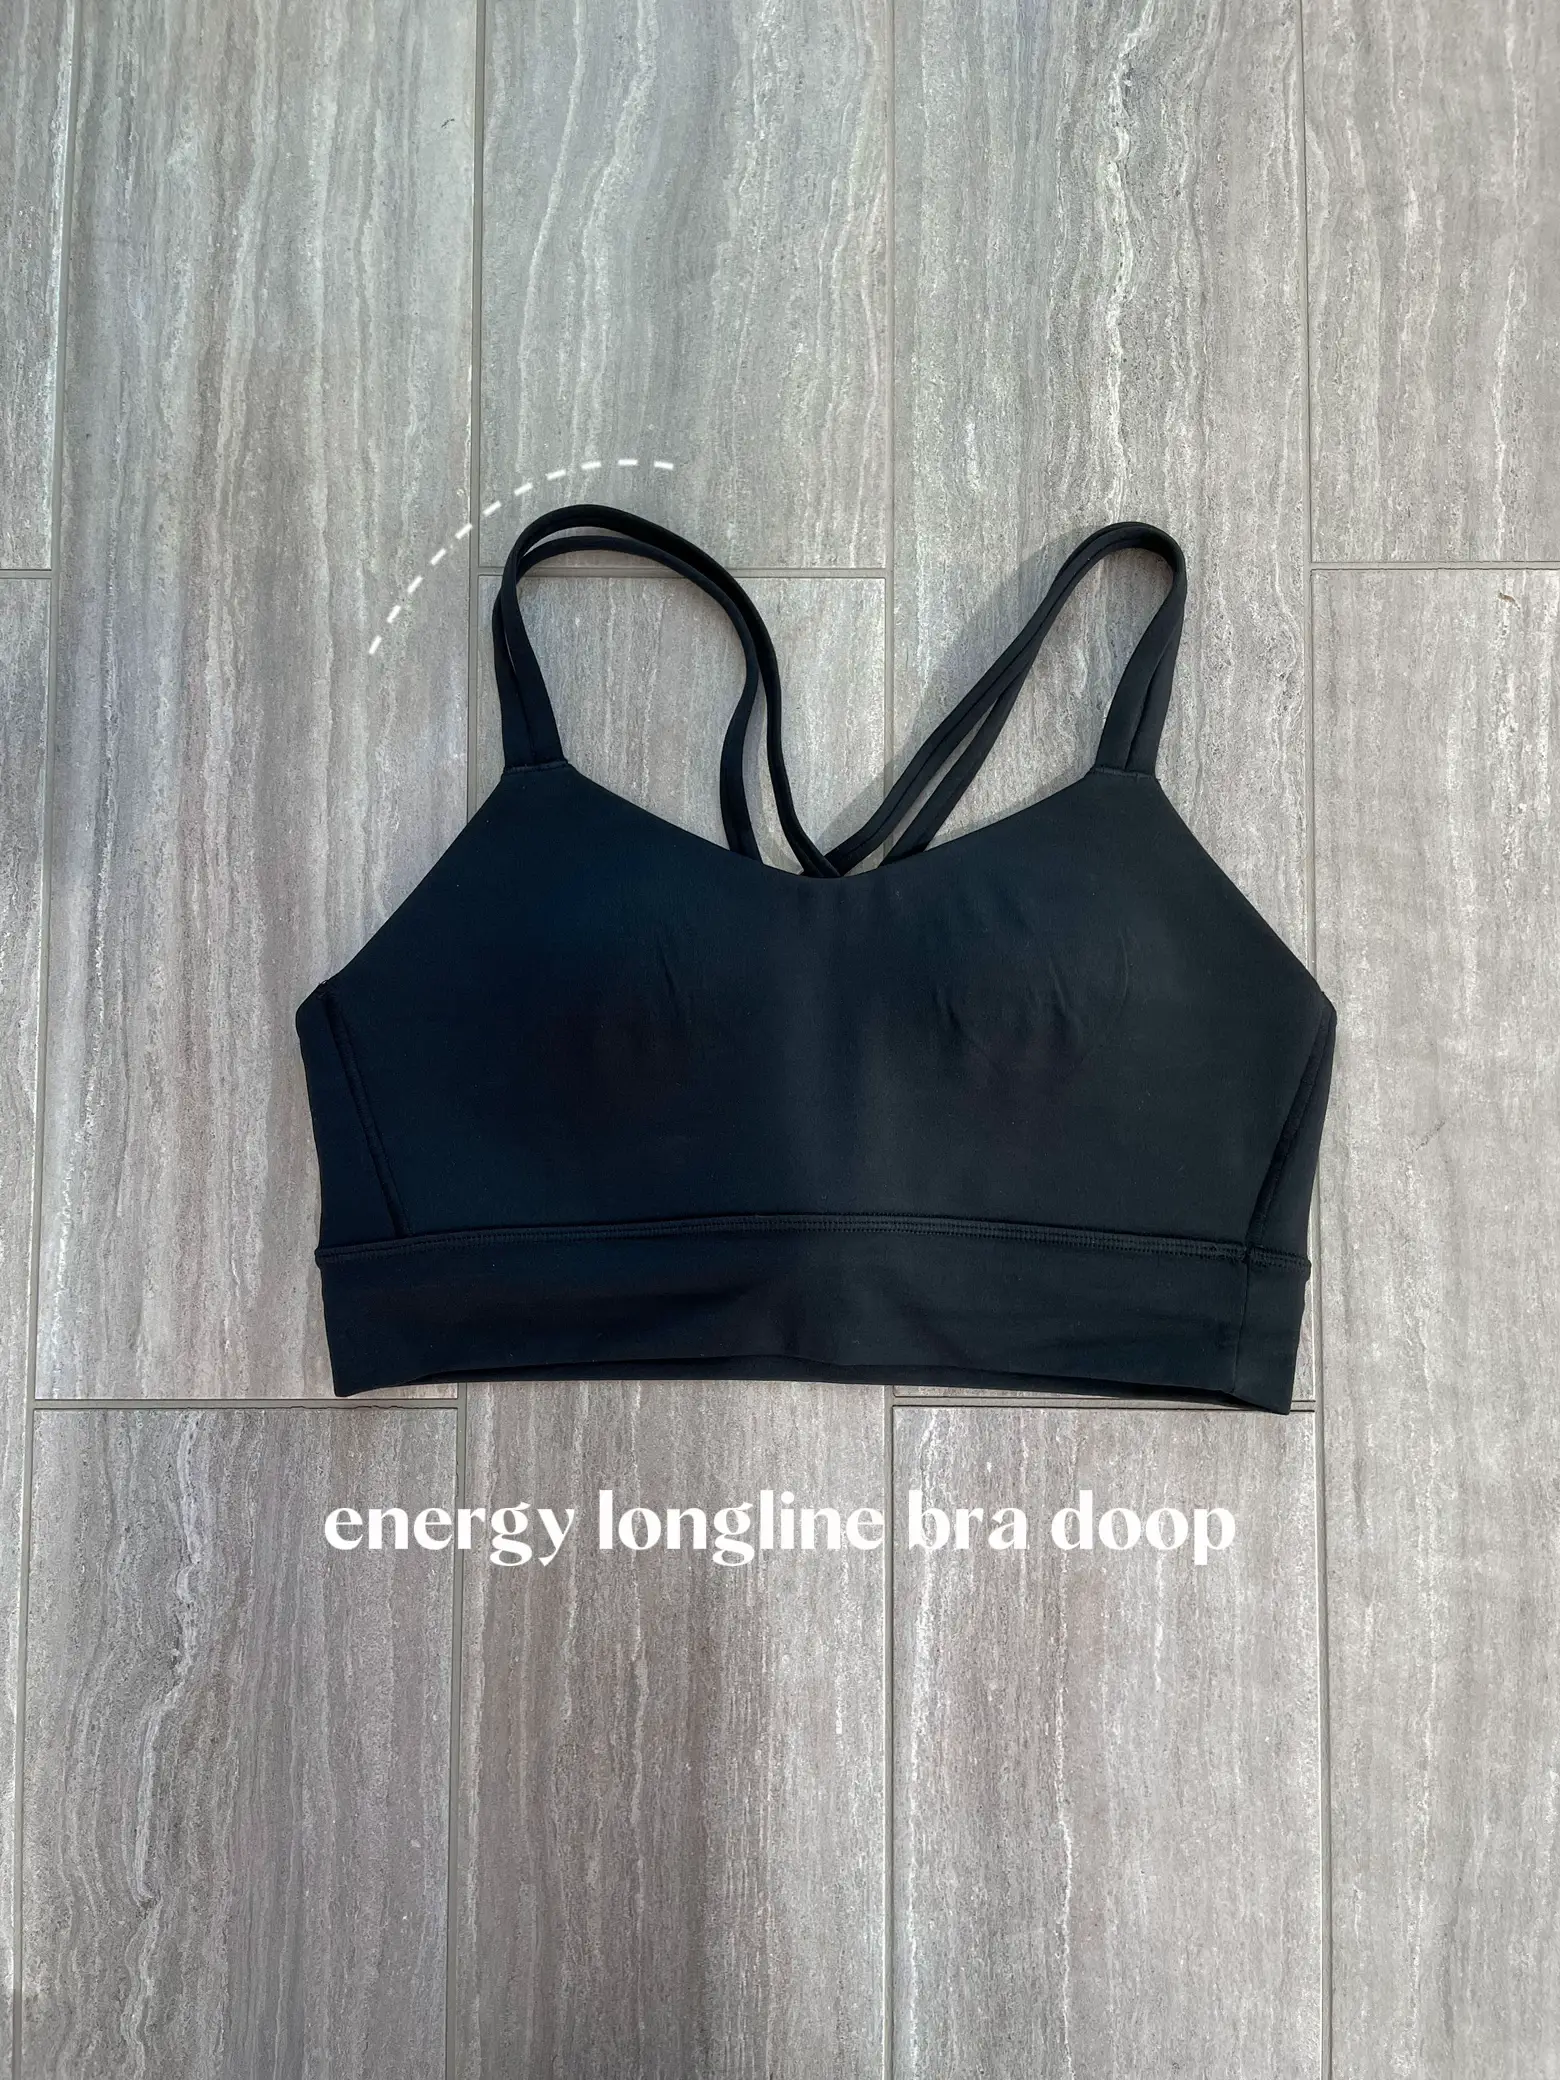 we could take this lesson on repeat 🧾 yes we make sports bra's that m